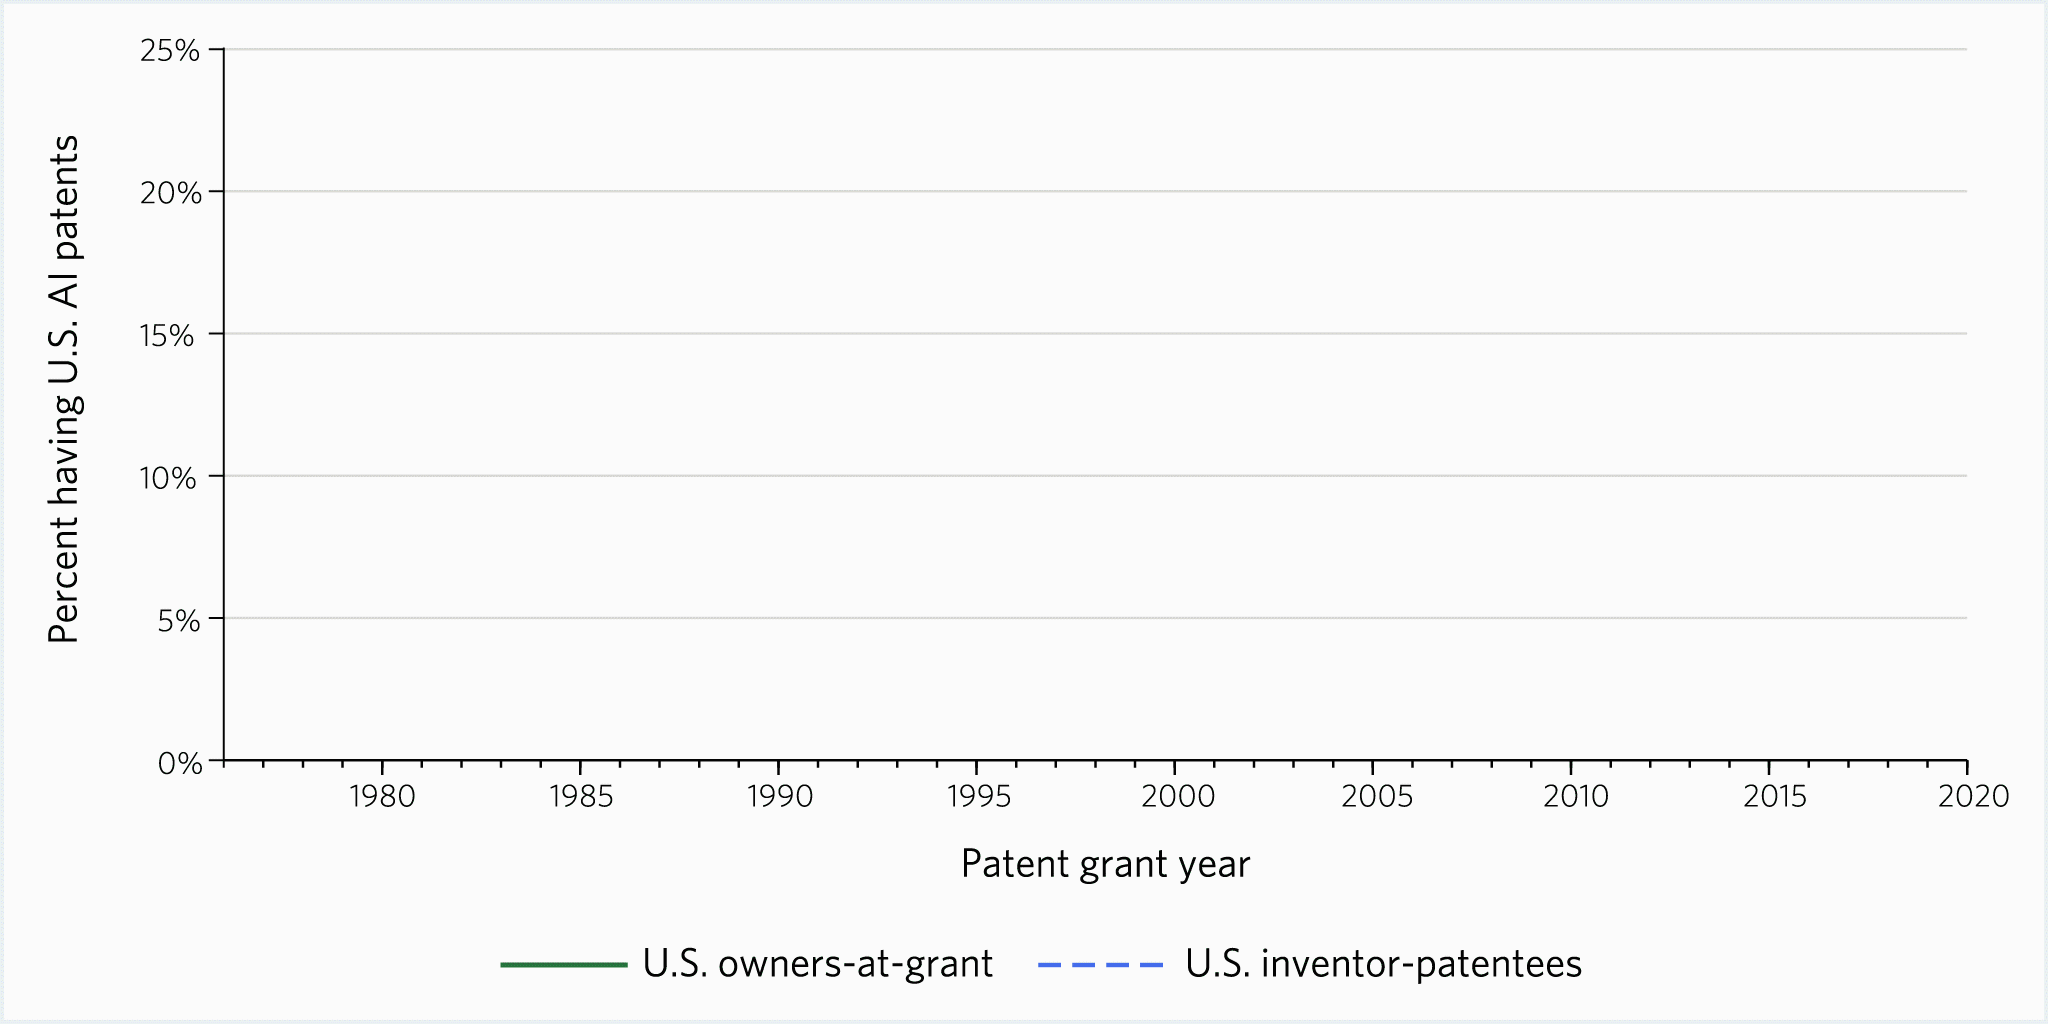 Figure 1. U.S. Inventor and Owner of AI-Related Patents: Percentages From 1975 to 2020